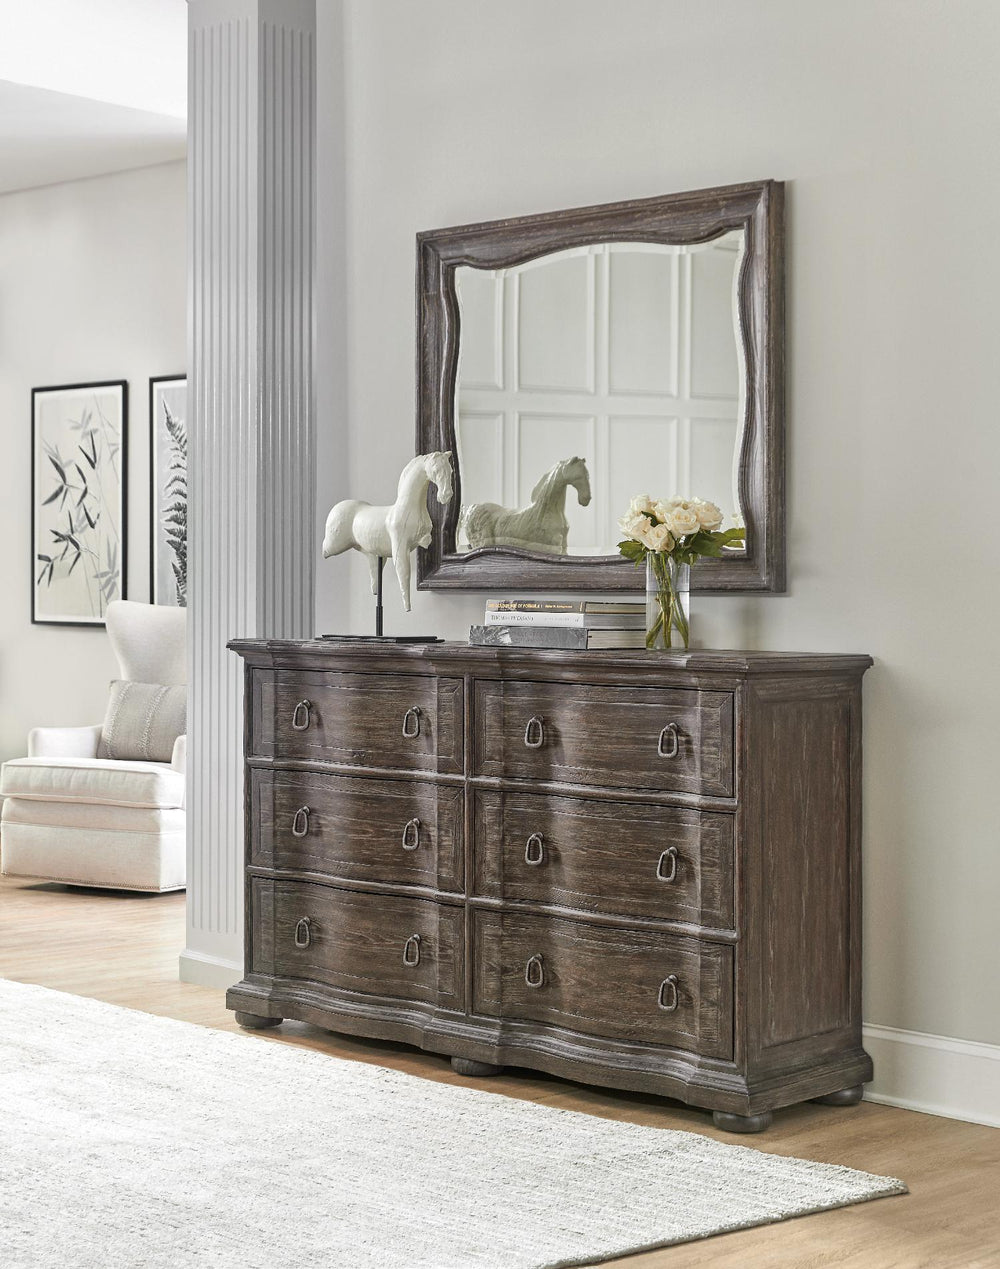 American Home Furniture | Hooker Furniture - Traditions Landscape Mirror